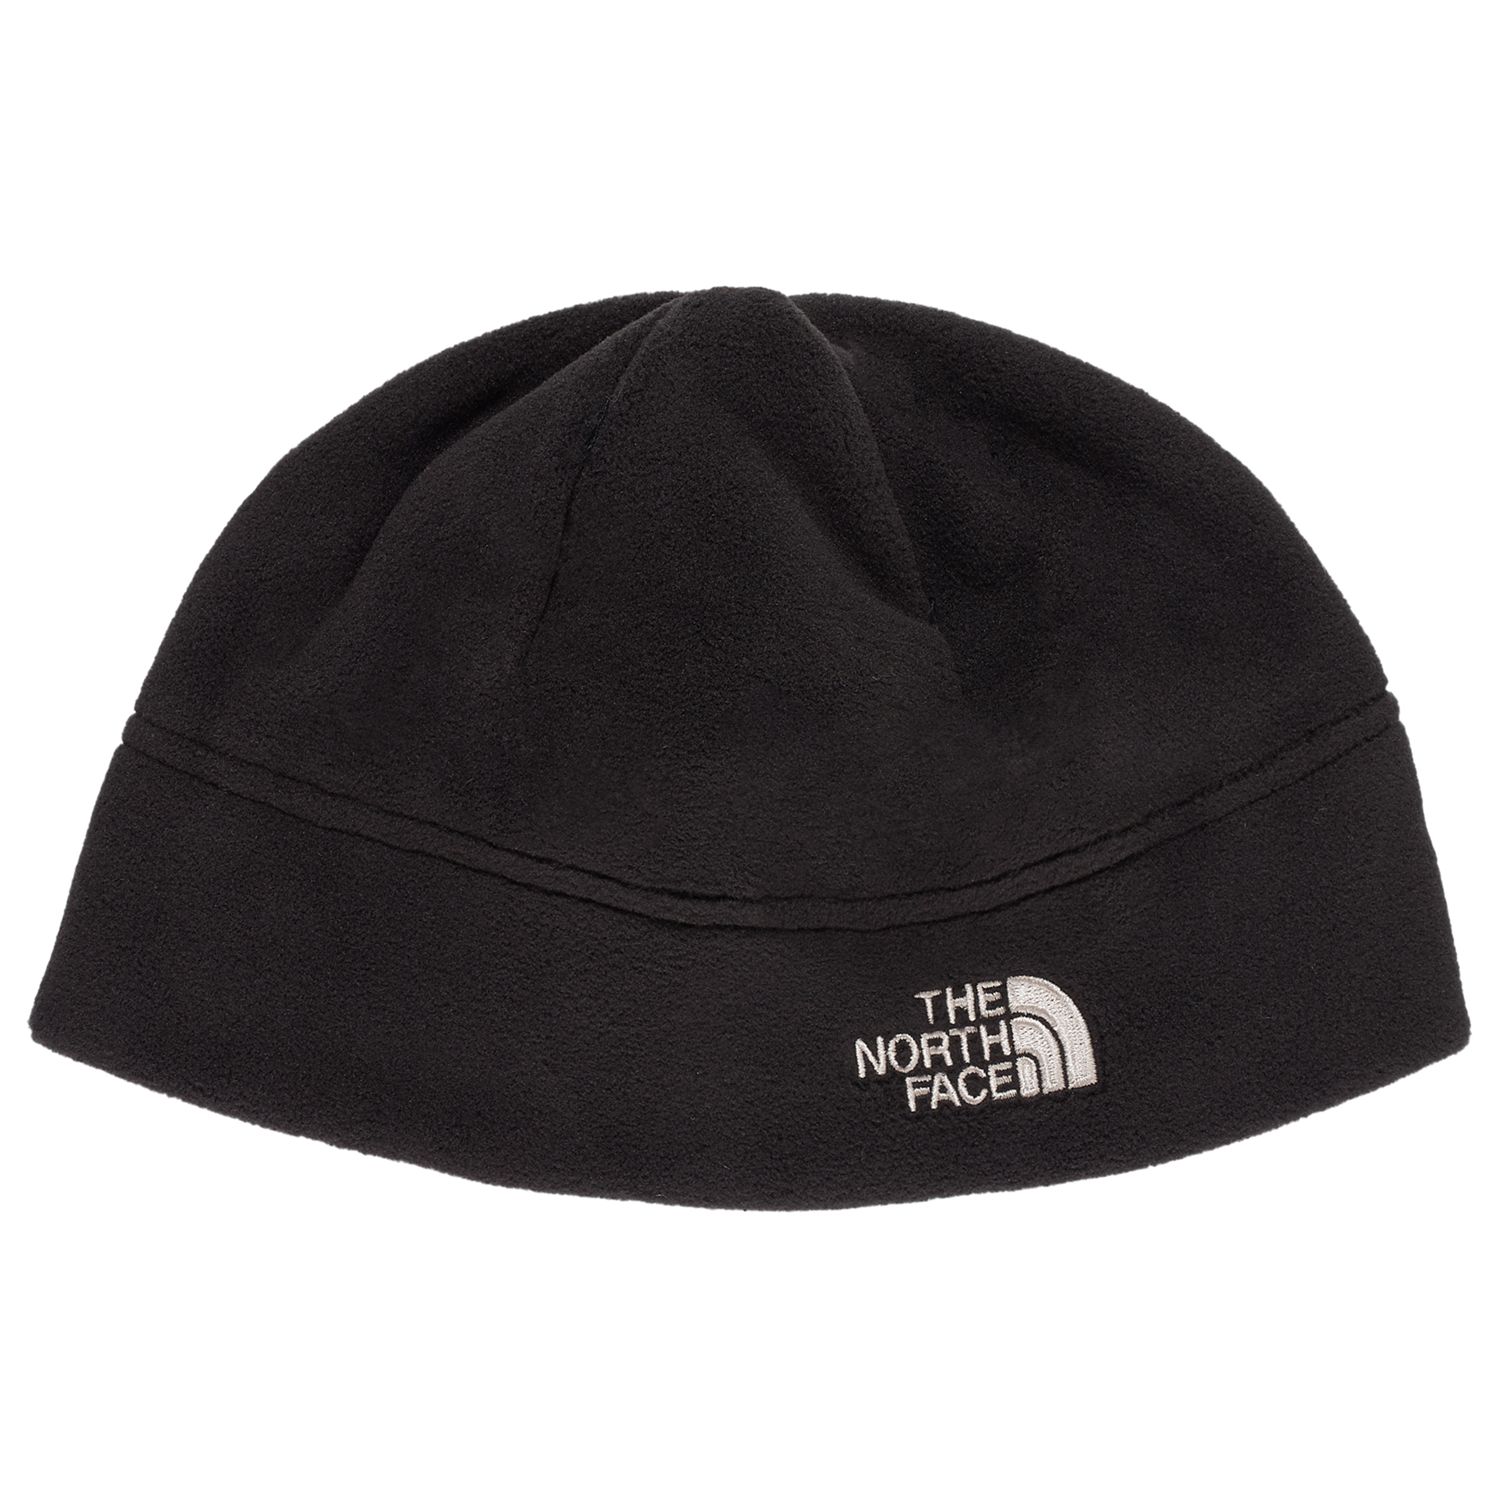 The North Face Flash Fleece Beanie, Large, Black at John Lewis & Partners